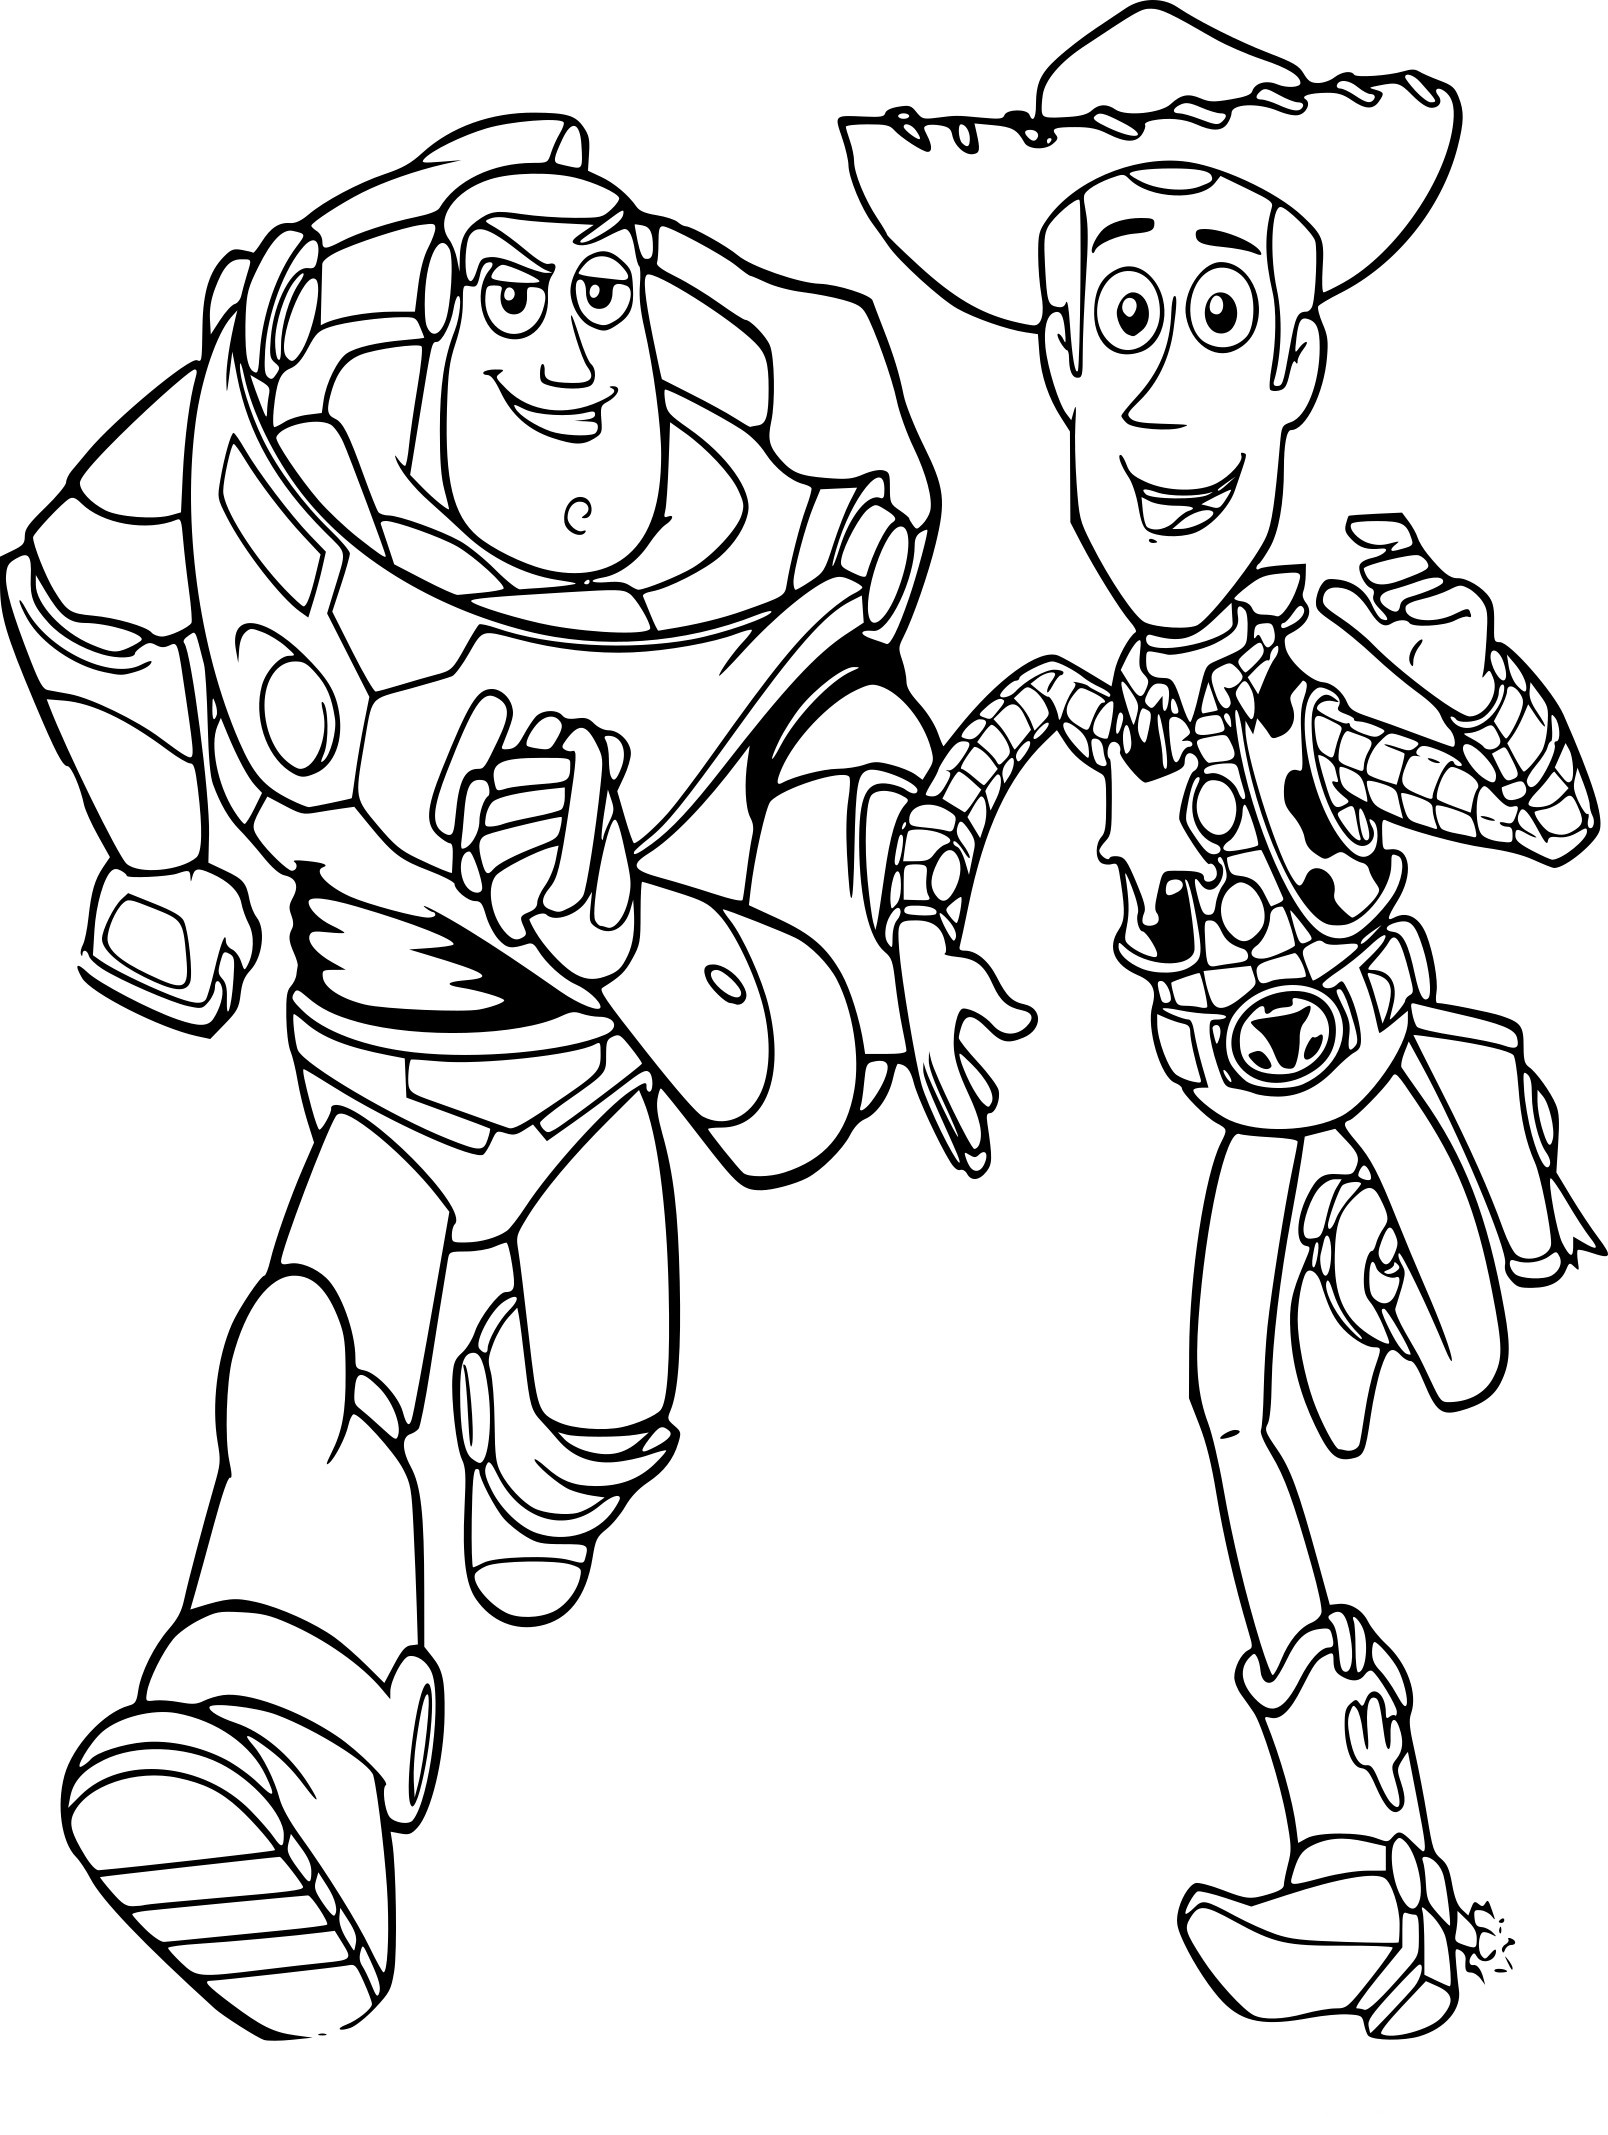 Woody Dessin Cool Galerie Luxe Dessin A Imprimer Woody Et Buzz – Mademoiselleosaki